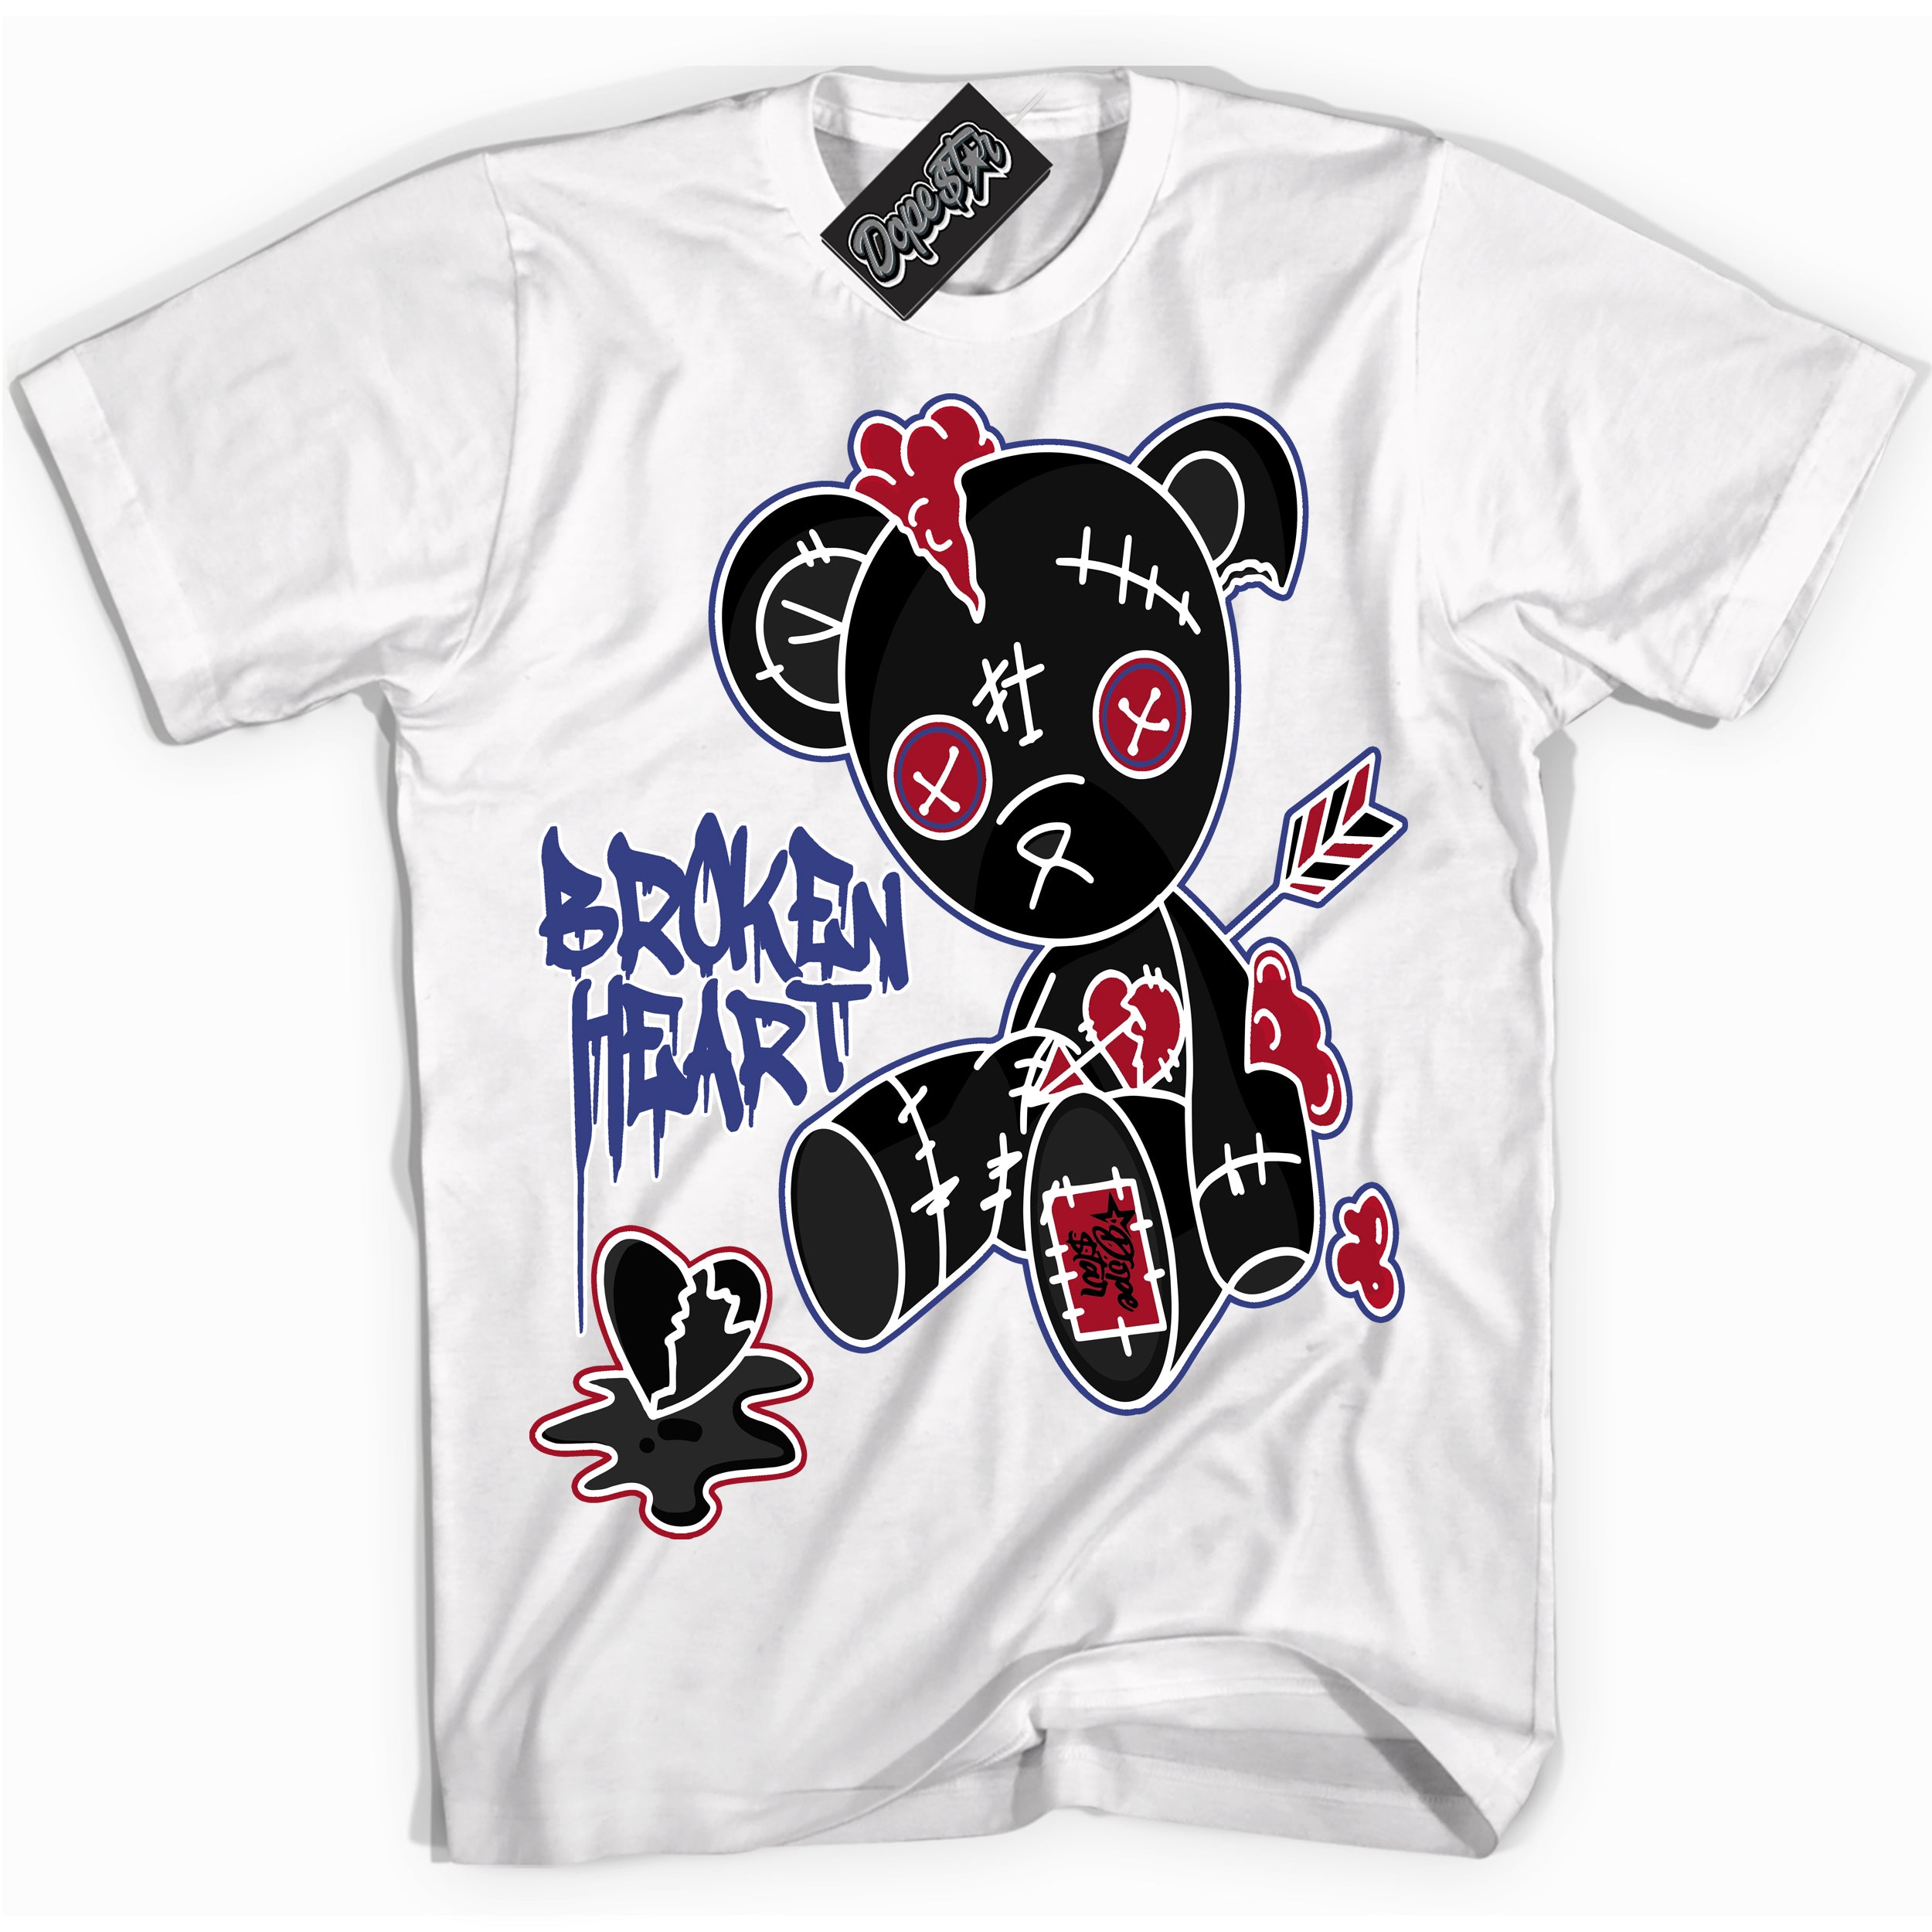 Cool White Shirt with “ Broken Heart Bear ” design that perfectly matches Playoffs 8s Sneakers.